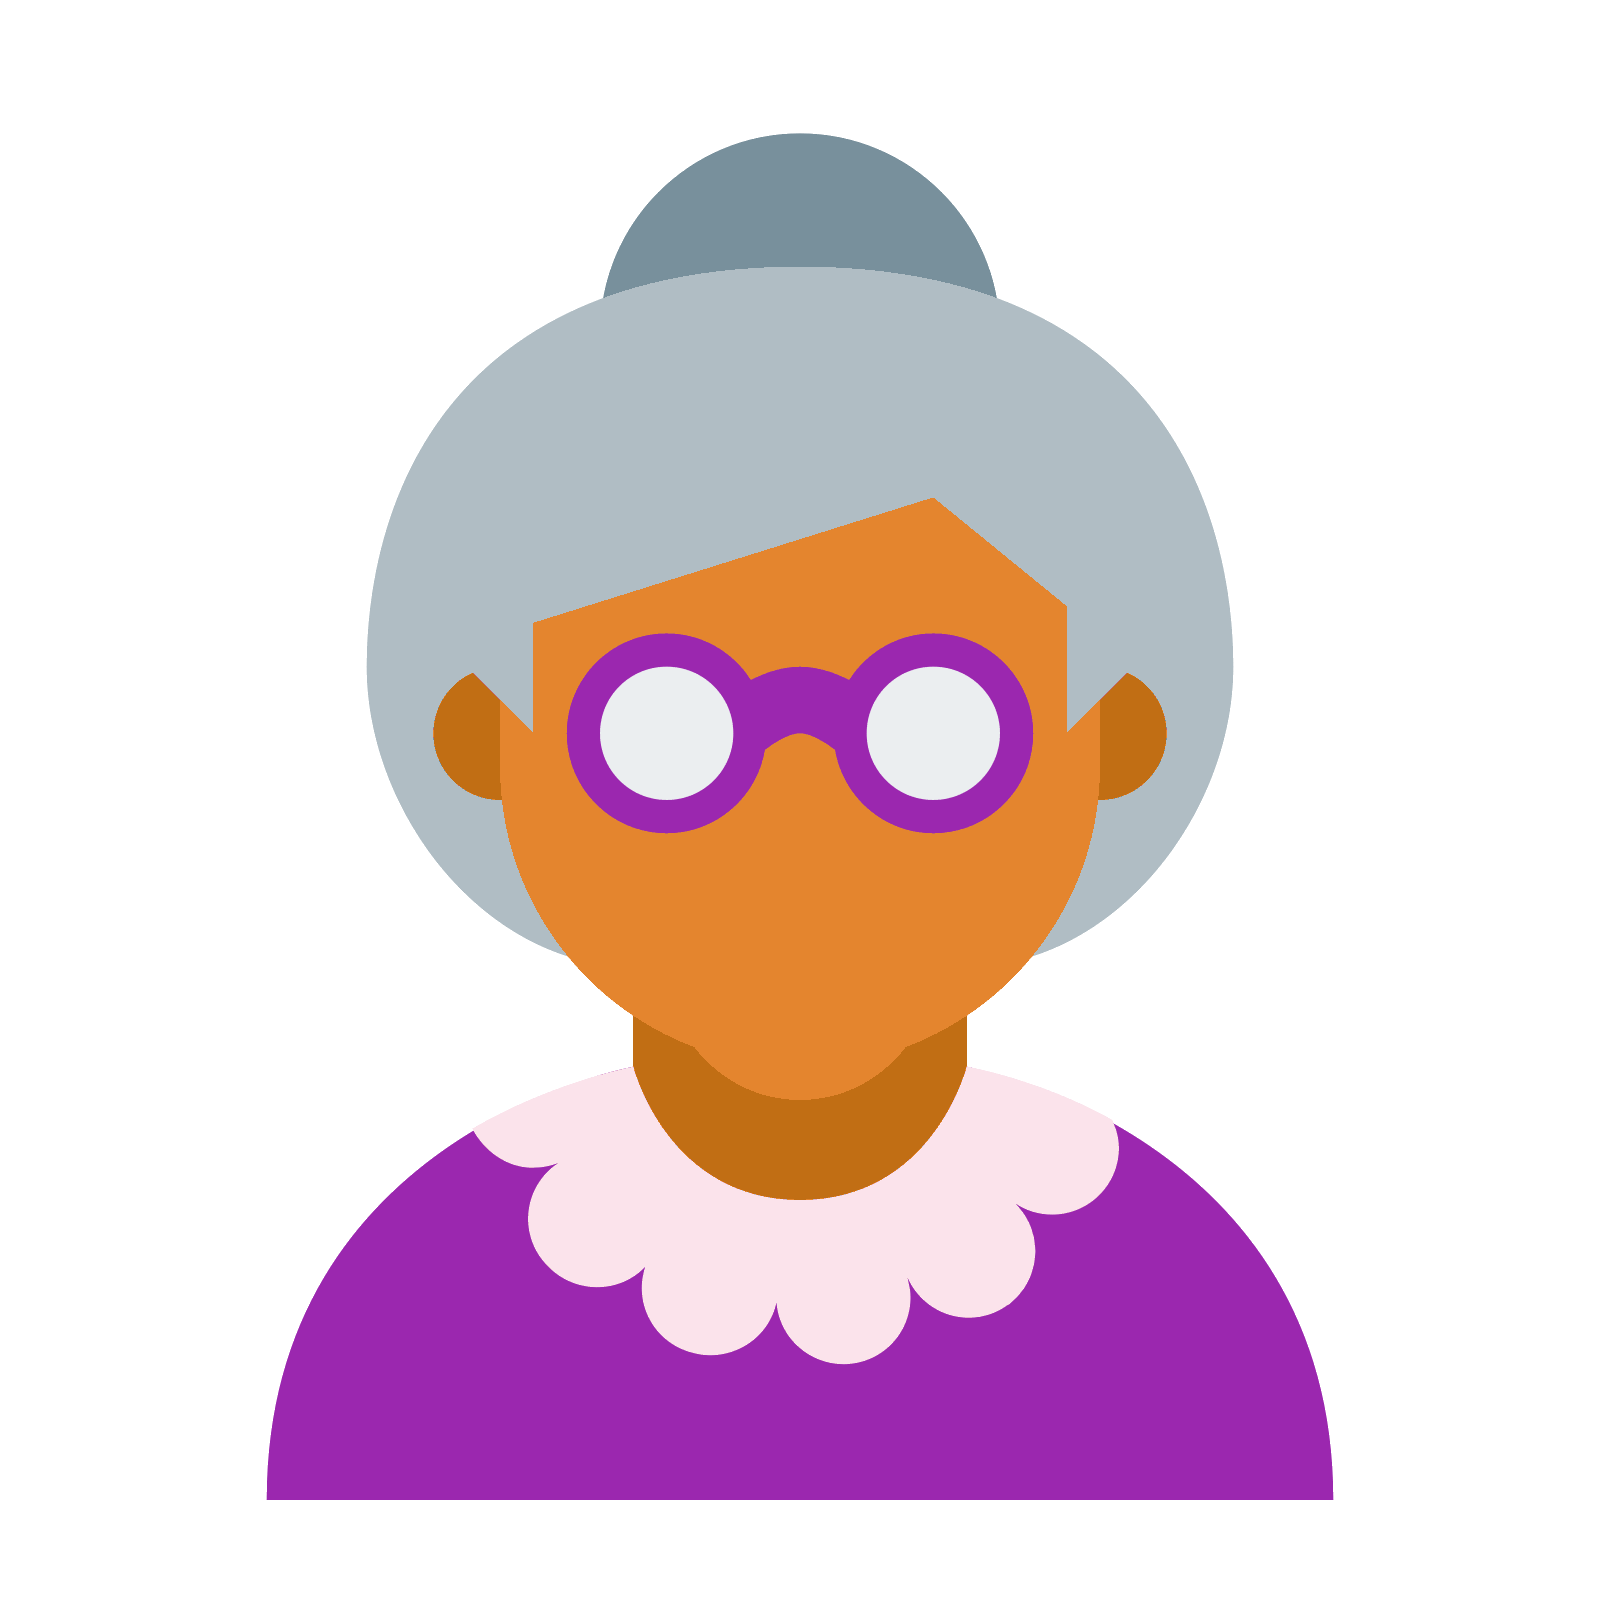 Grandparents clipart old age home. Icon free download png